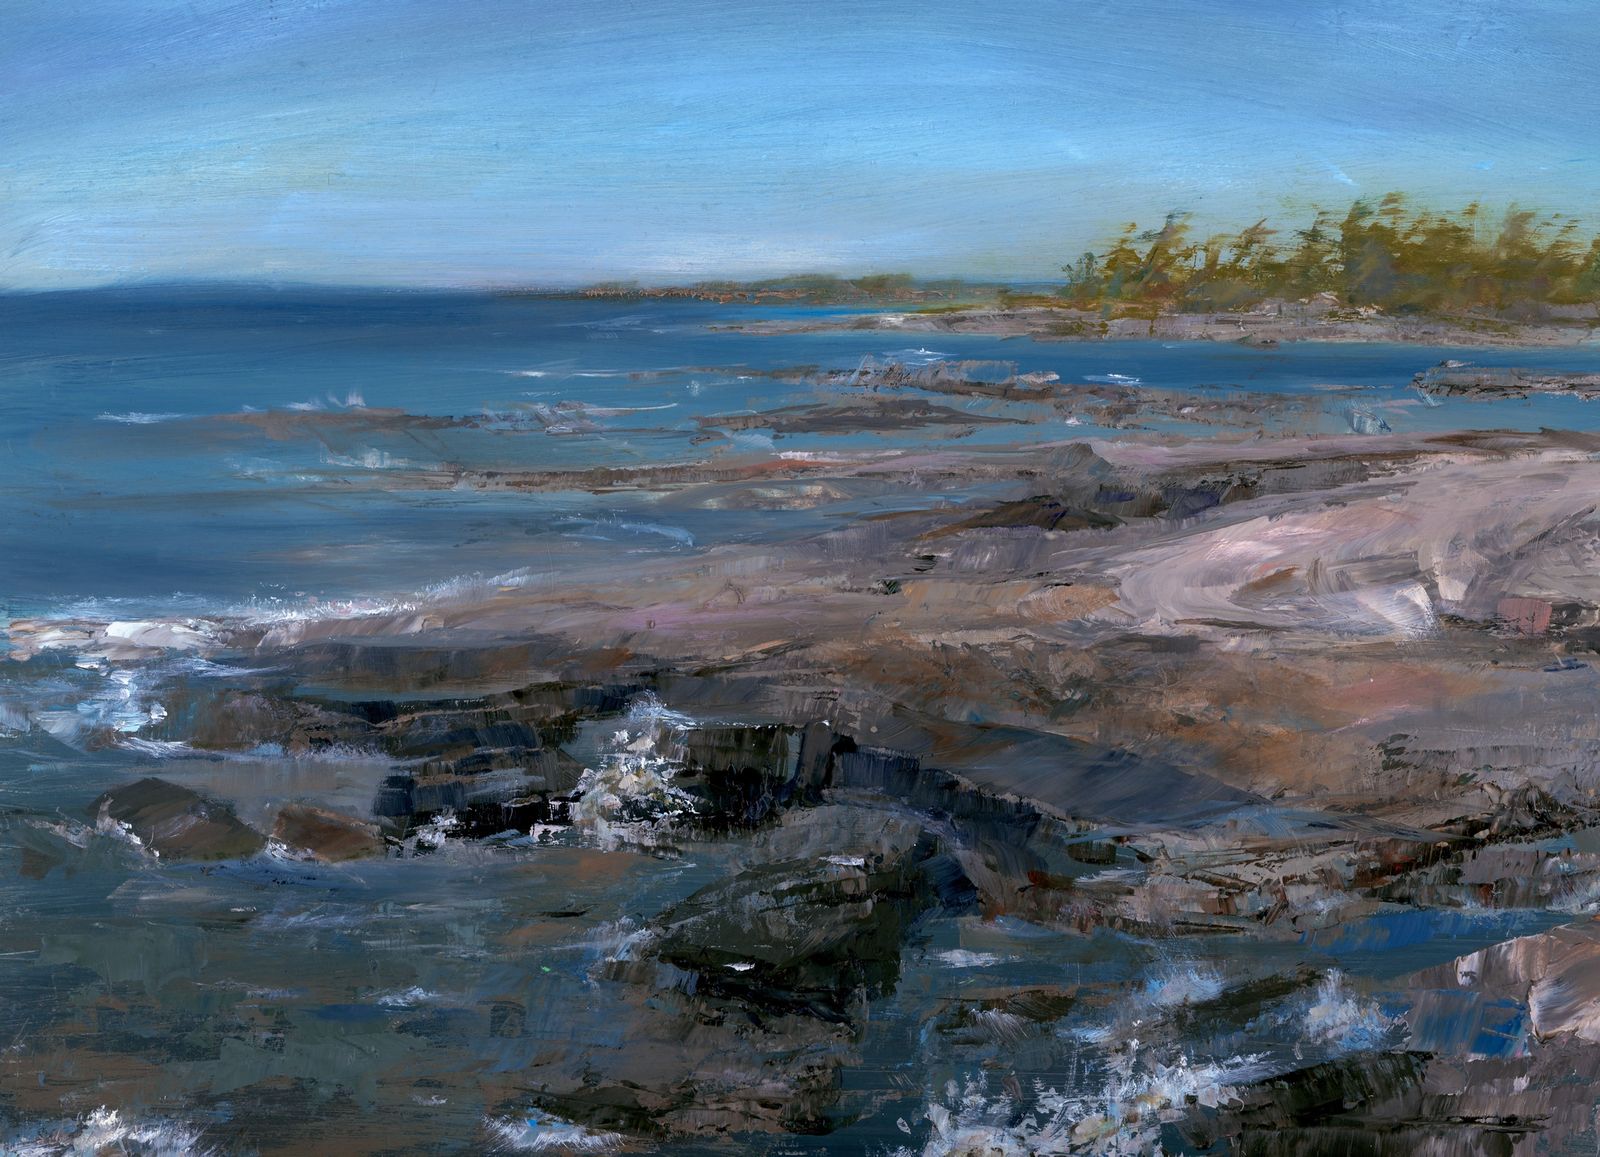 Oil painting on panel of a windy day on the bay. Waves are washing against pink and grey granite rock. The view is toward a distant island with pines. 